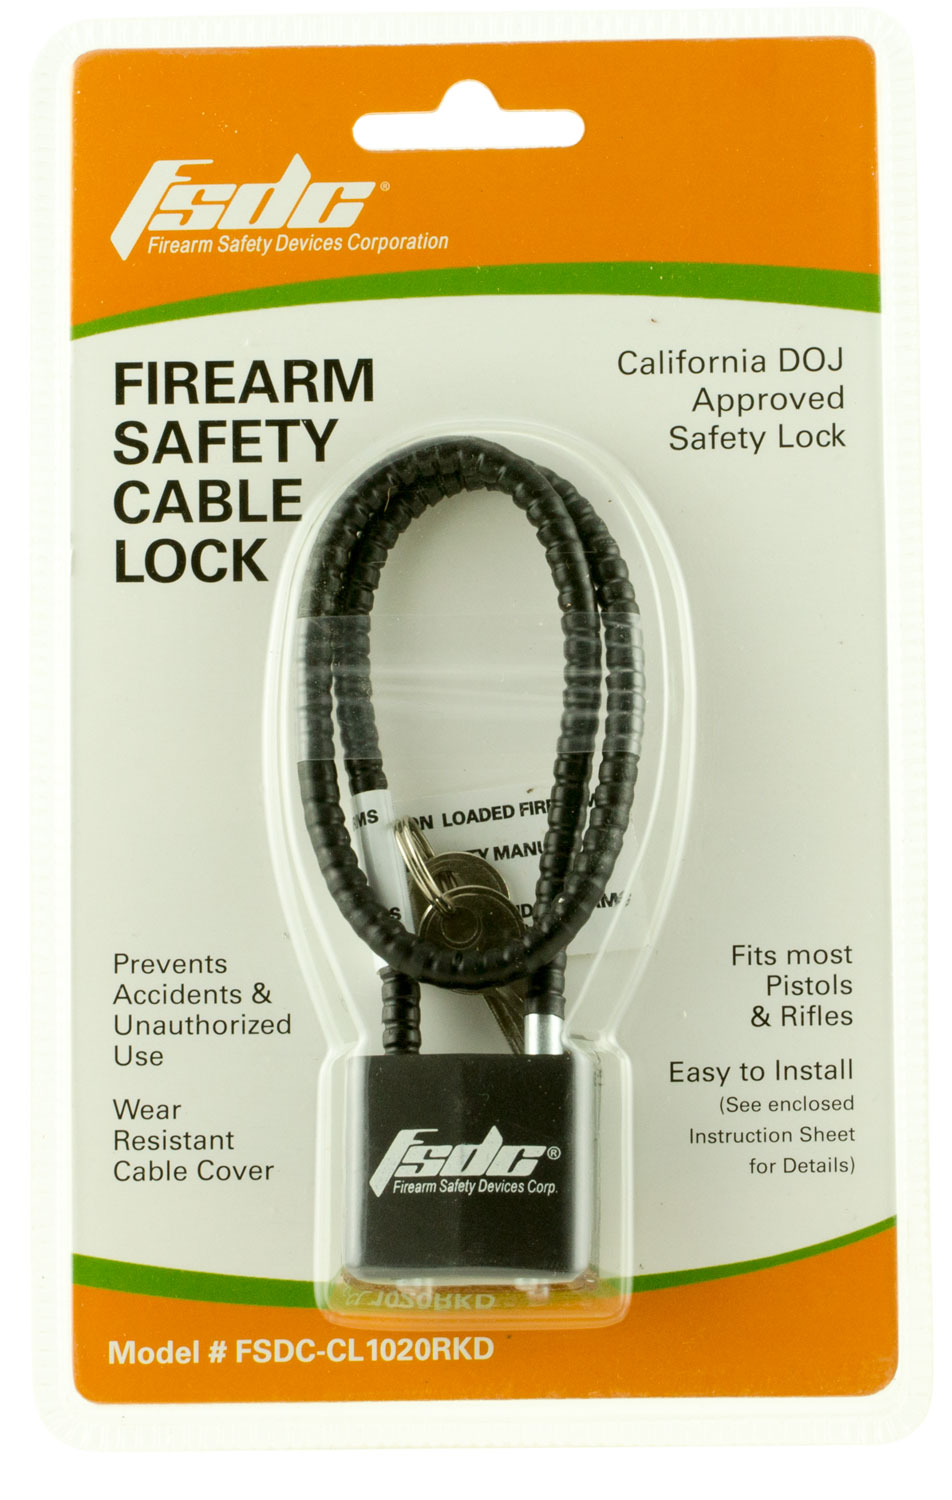 Firearm Safety Devices Corporation Tl3050rkd FSDC Keyed Trigger Lock Ca Key for sale online 